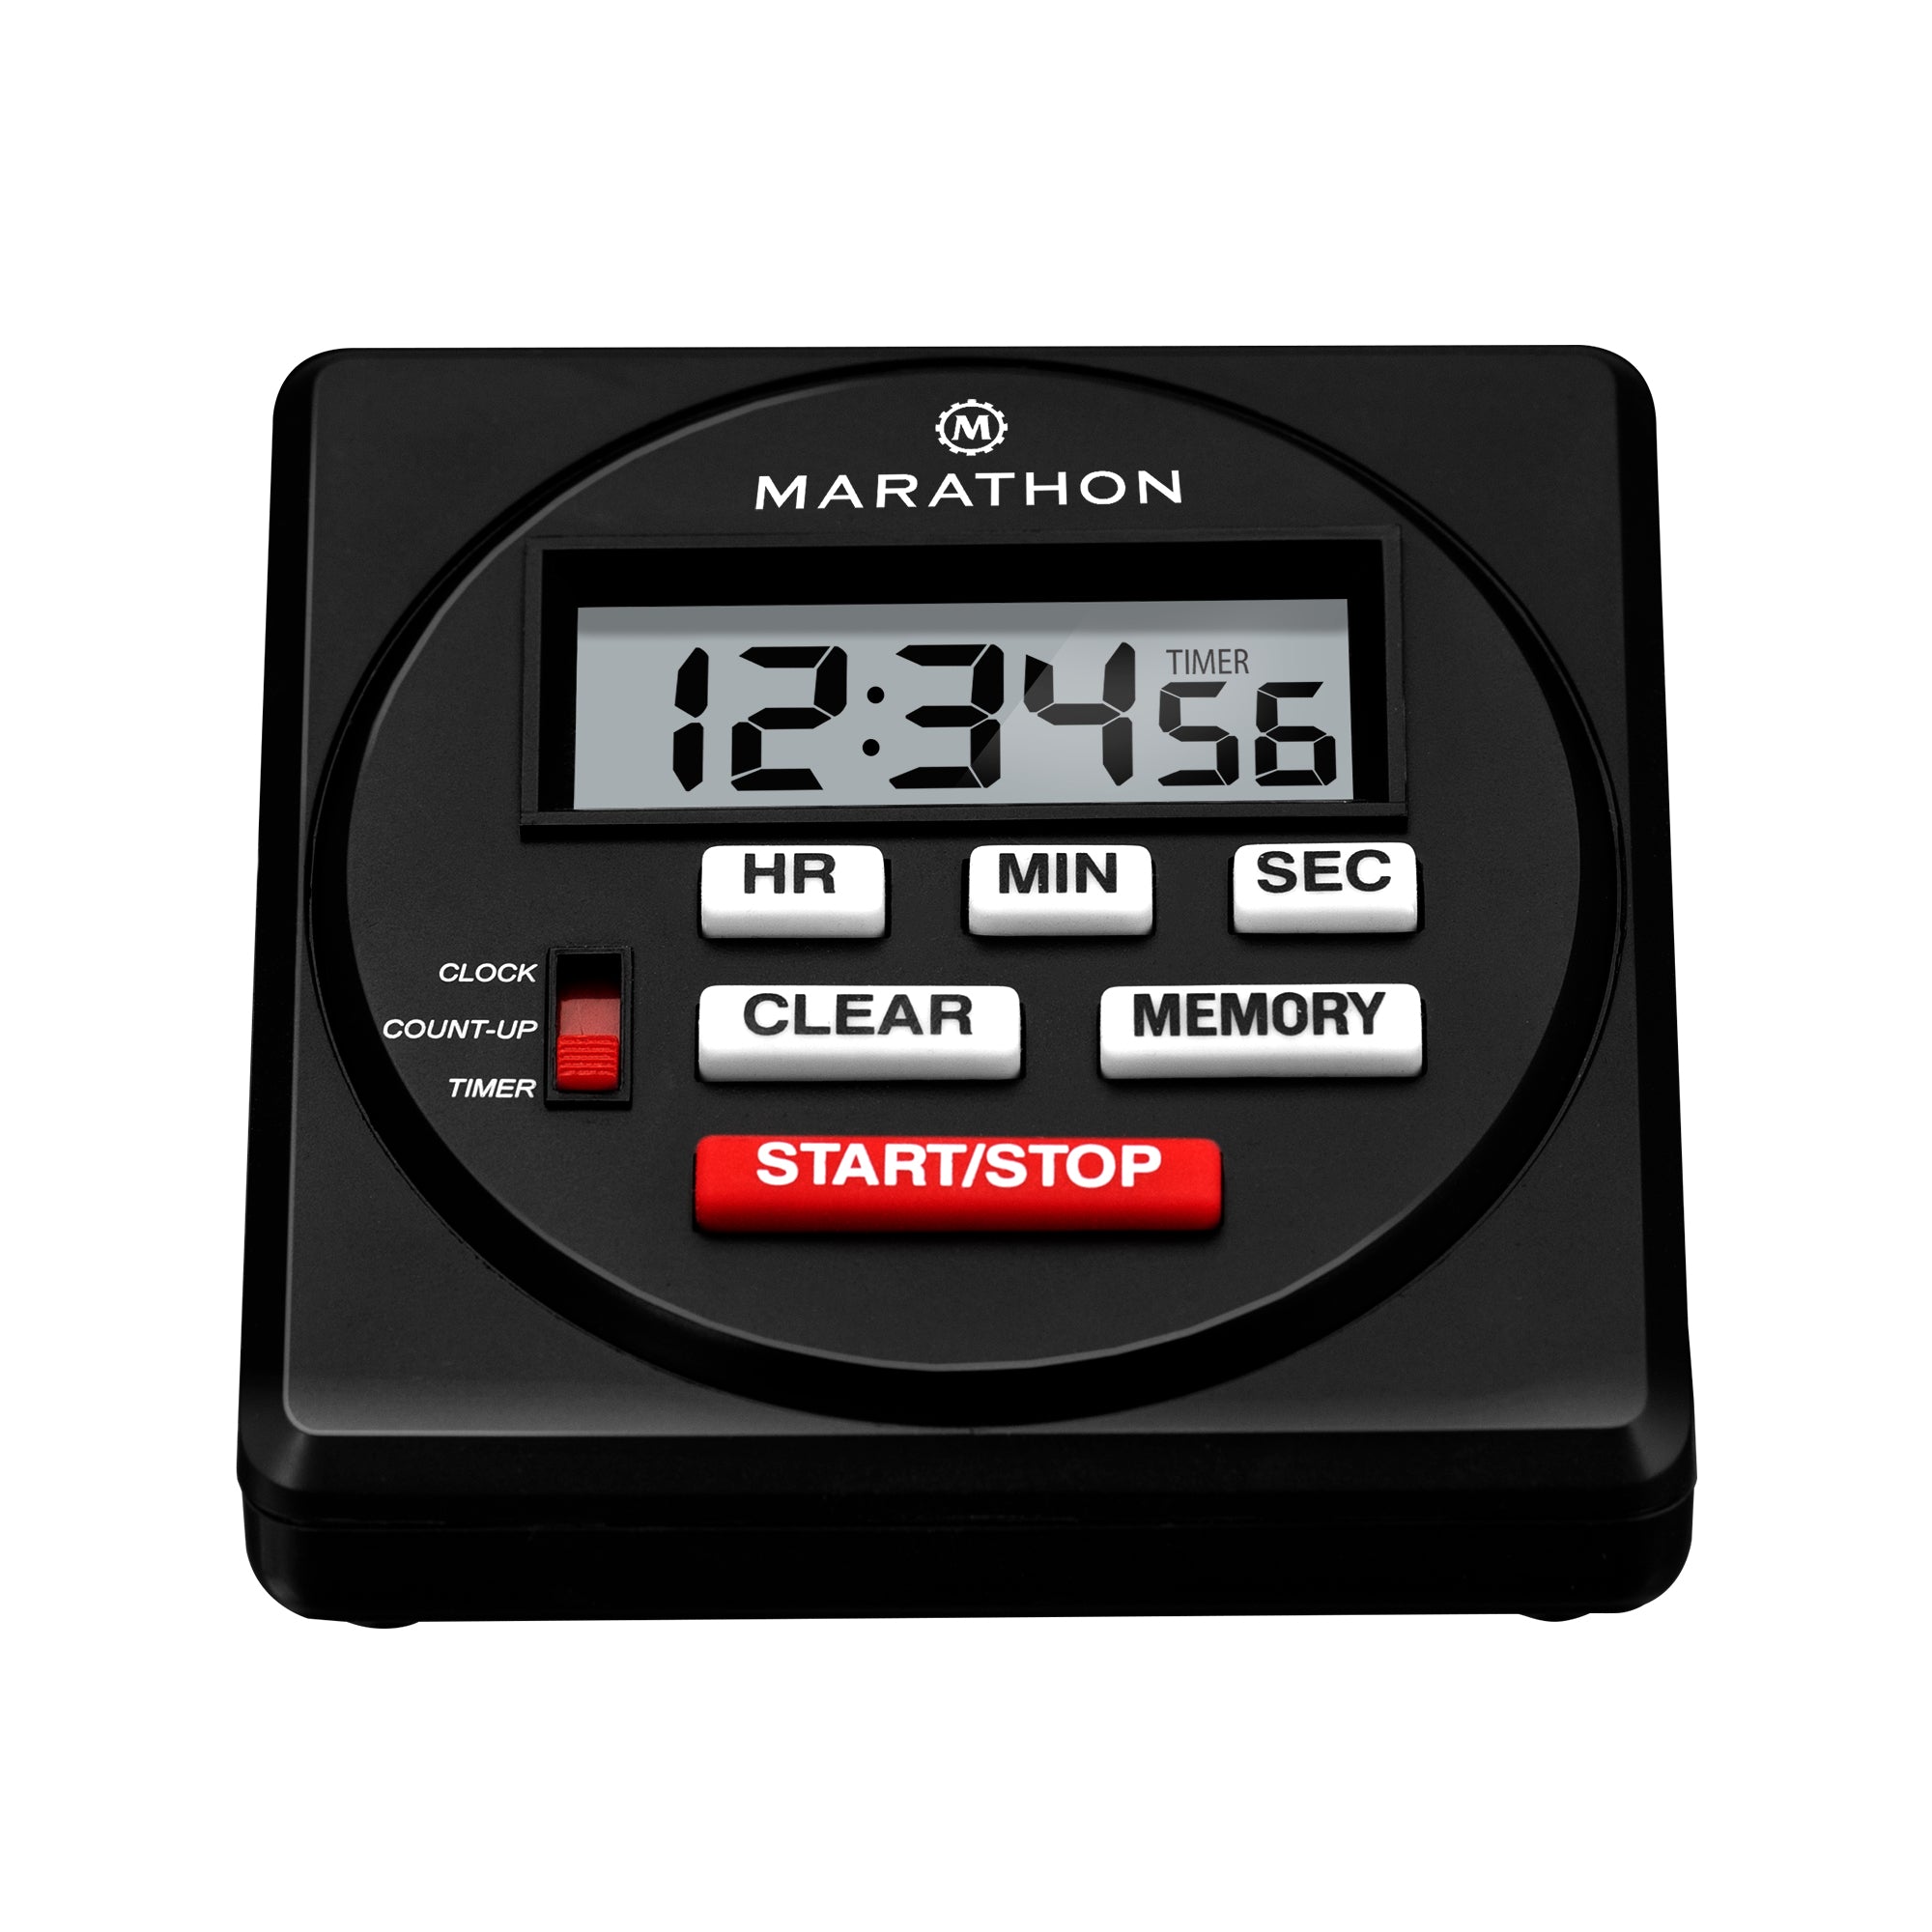 24 Hour Digital Timer Countdown, Count-up and Clock Feature - Marathon Watch Company